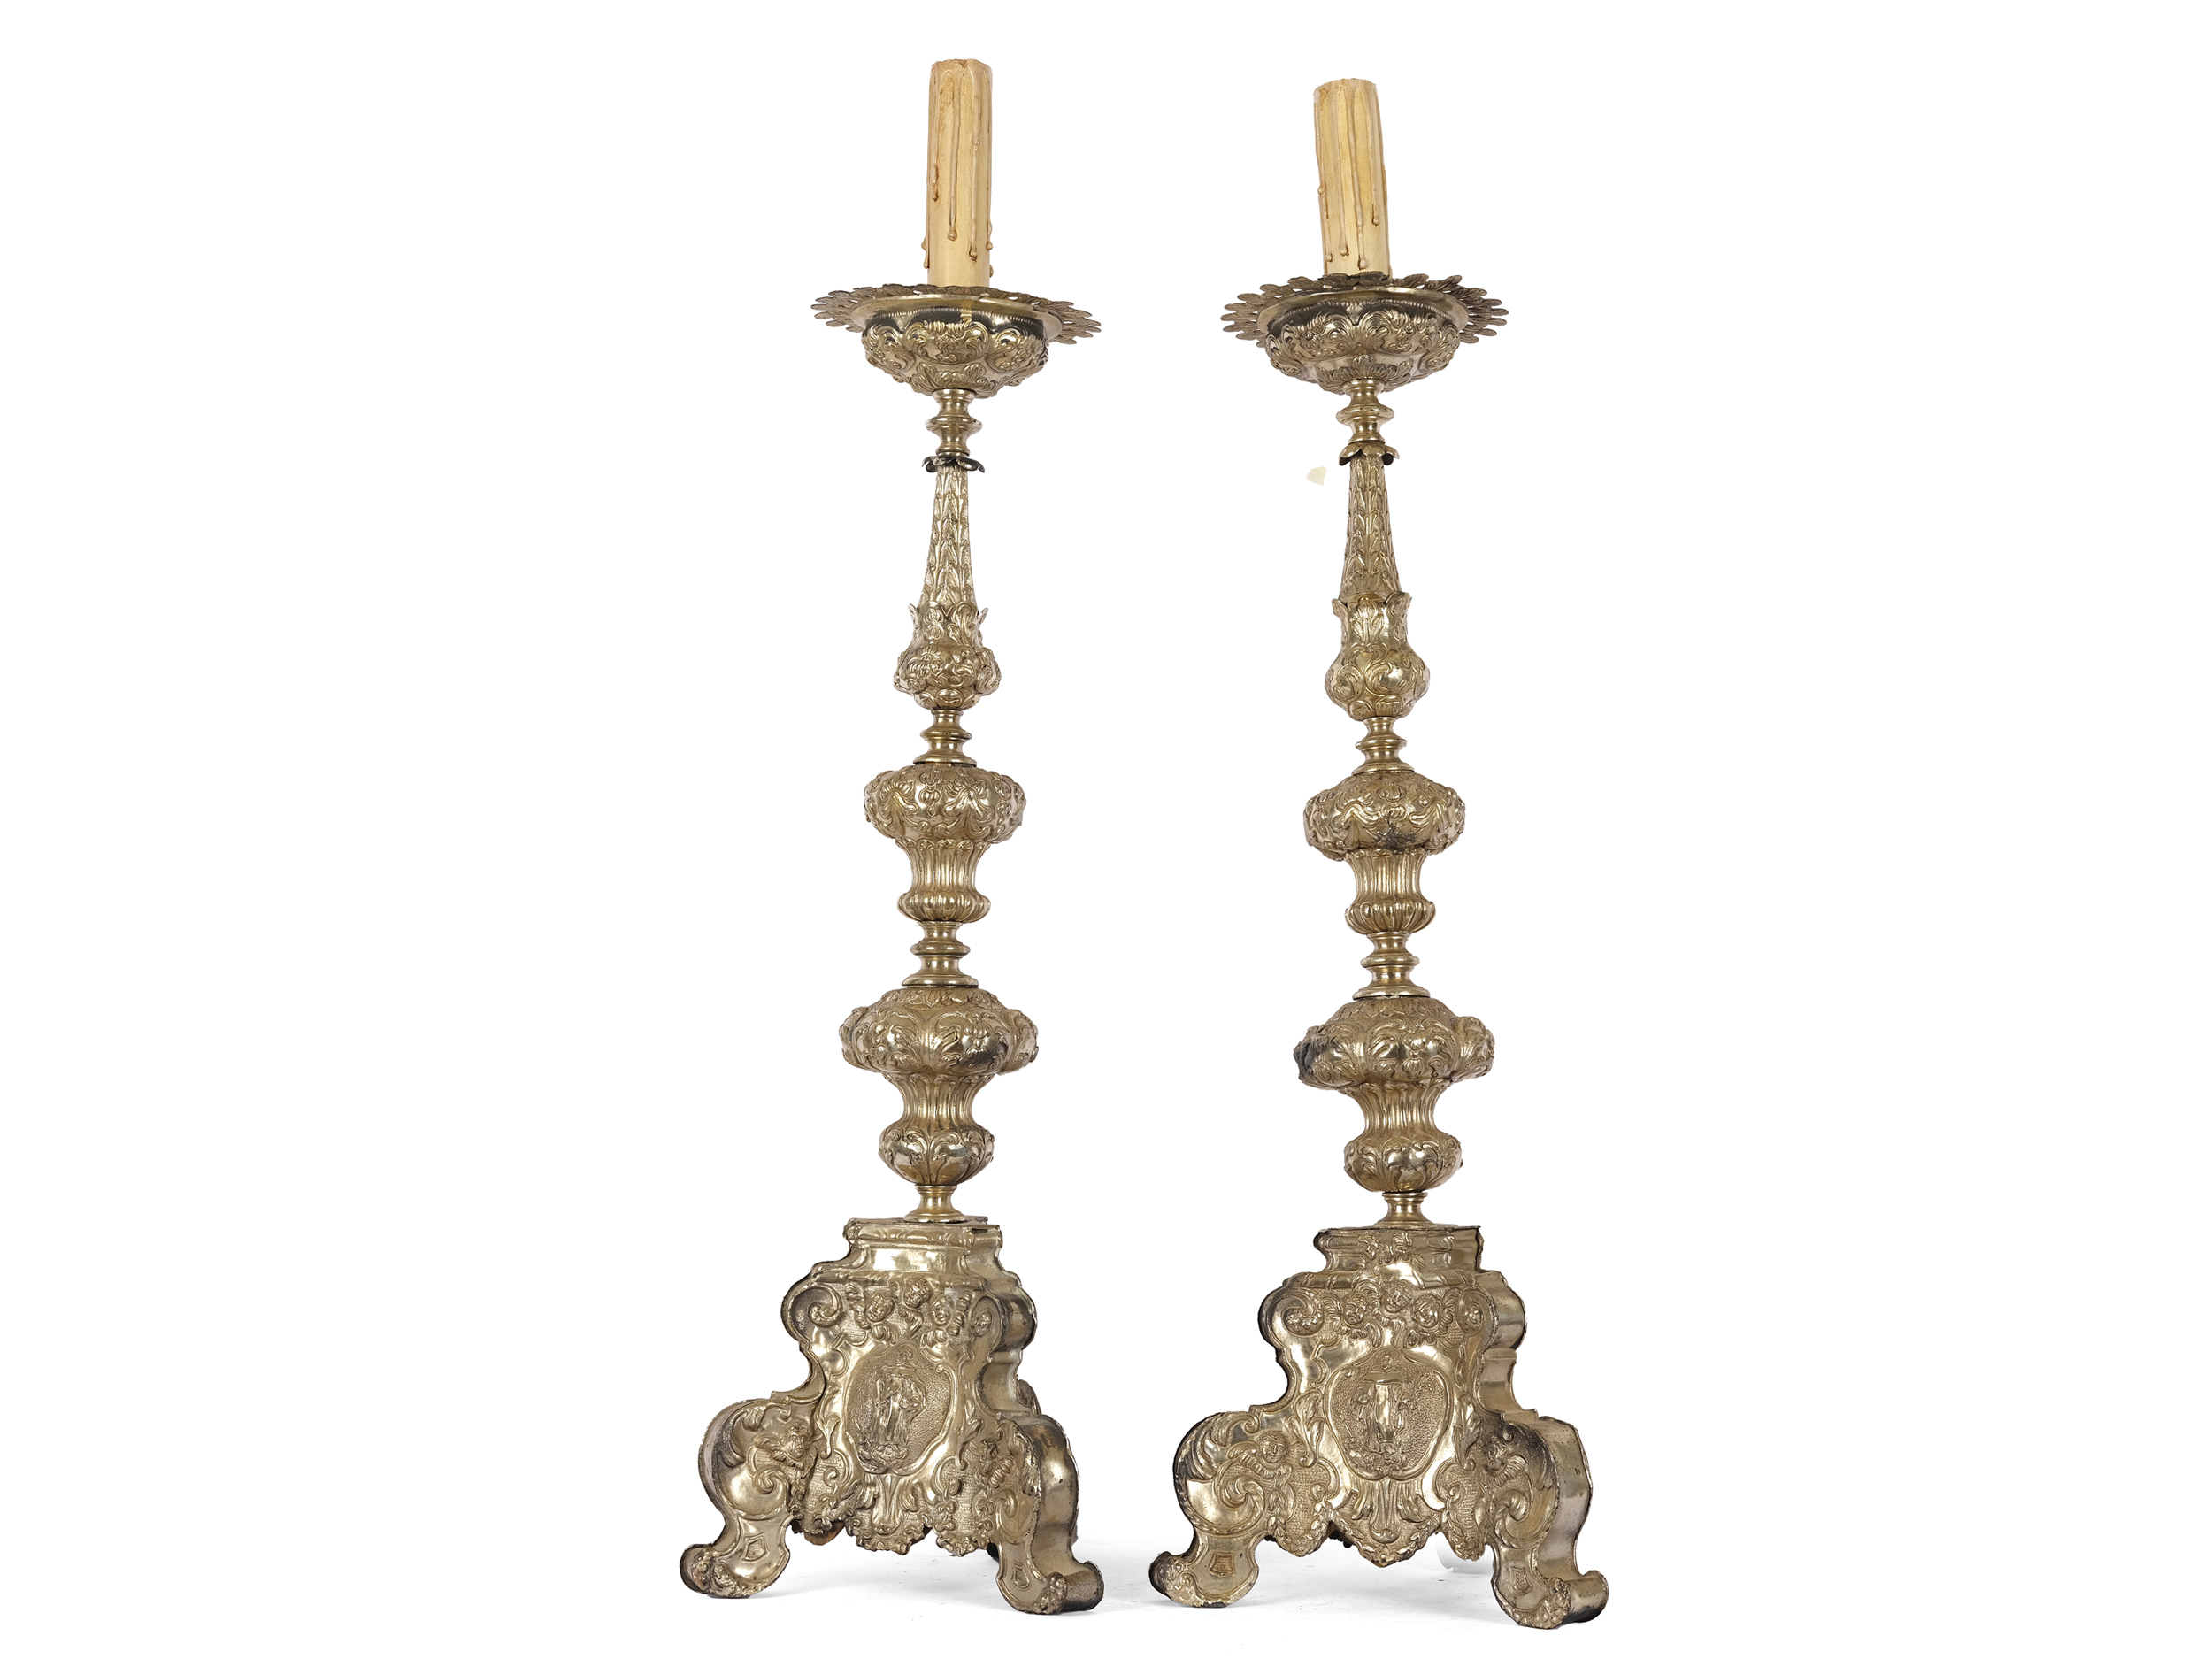 Pair of baroque candlesticks, 18th century - Image 2 of 3